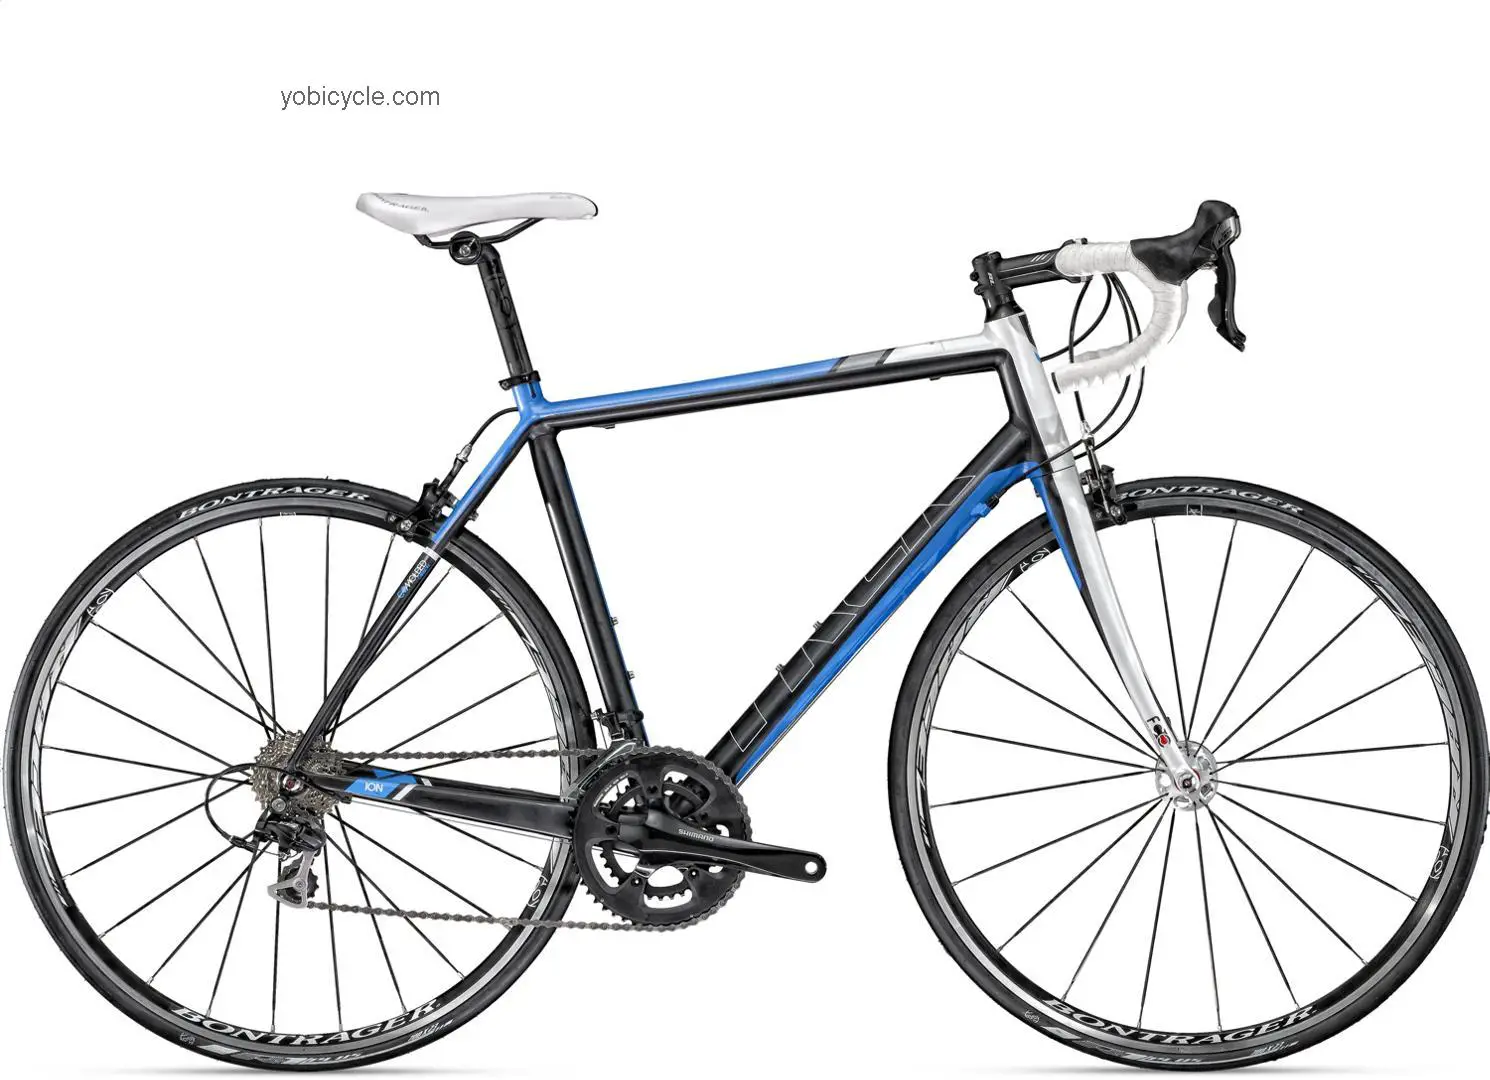 Trek Gary Fisher Ion Pro 2011 comparison online with competitors